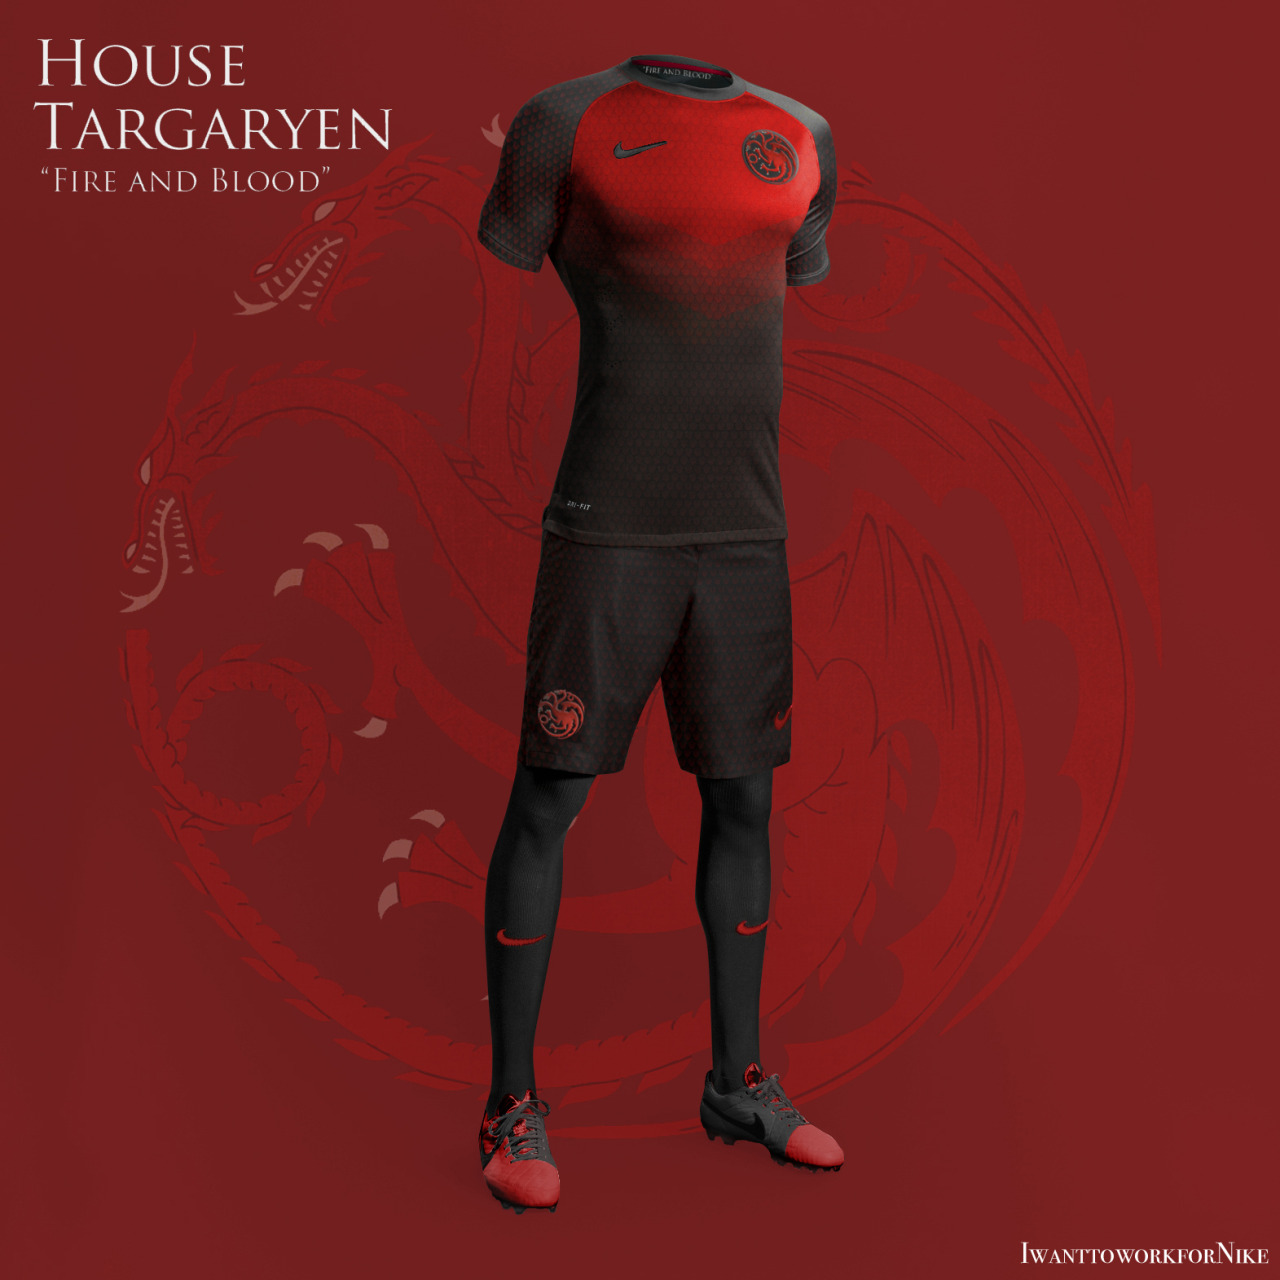 iwanttoworkfornike:  #Targaryen #fireandblood. Can you name some players that could